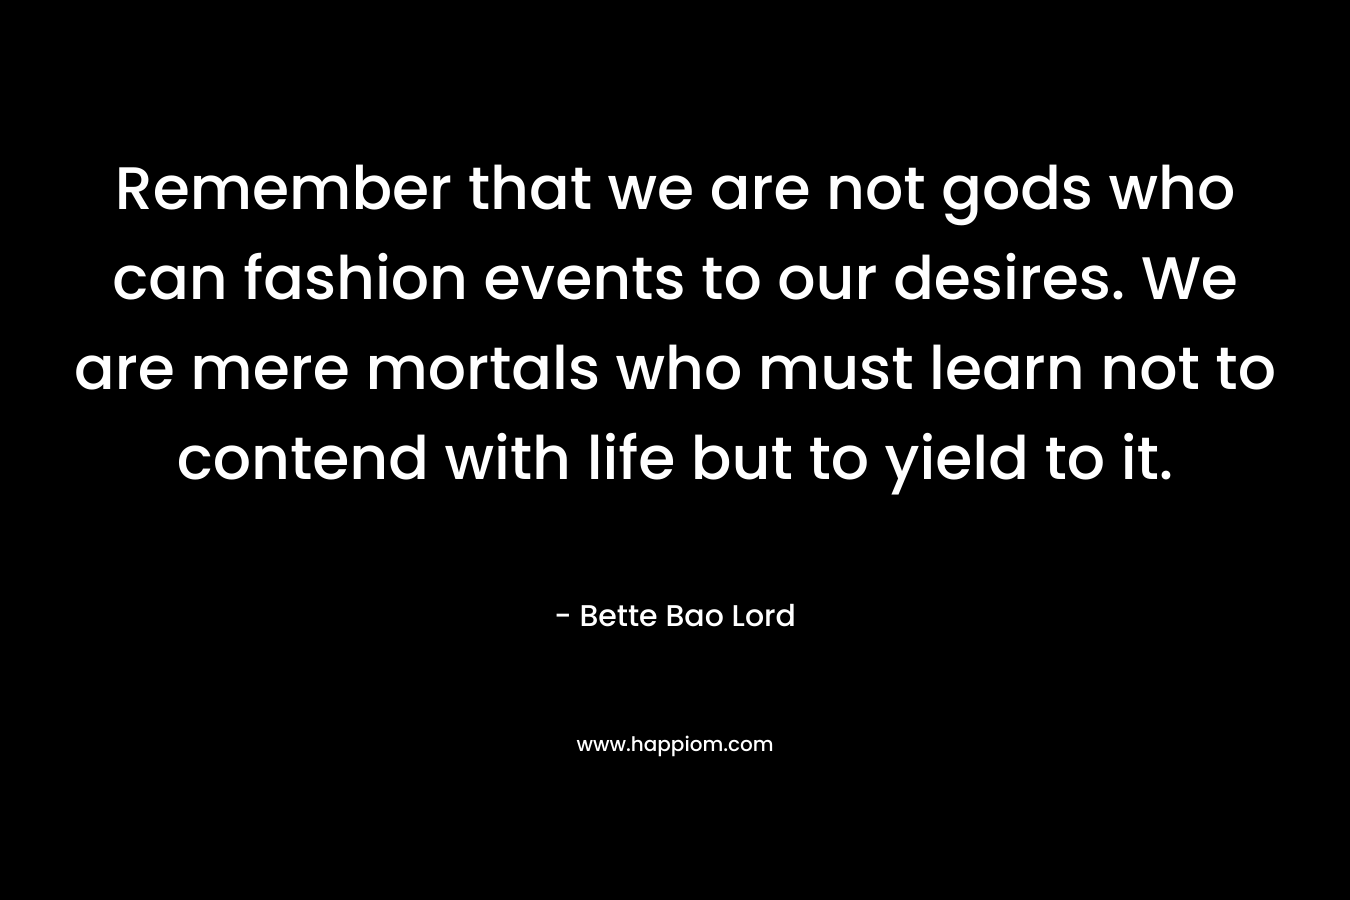 Remember that we are not gods who can fashion events to our desires. We are mere mortals who must learn not to contend with life but to yield to it.